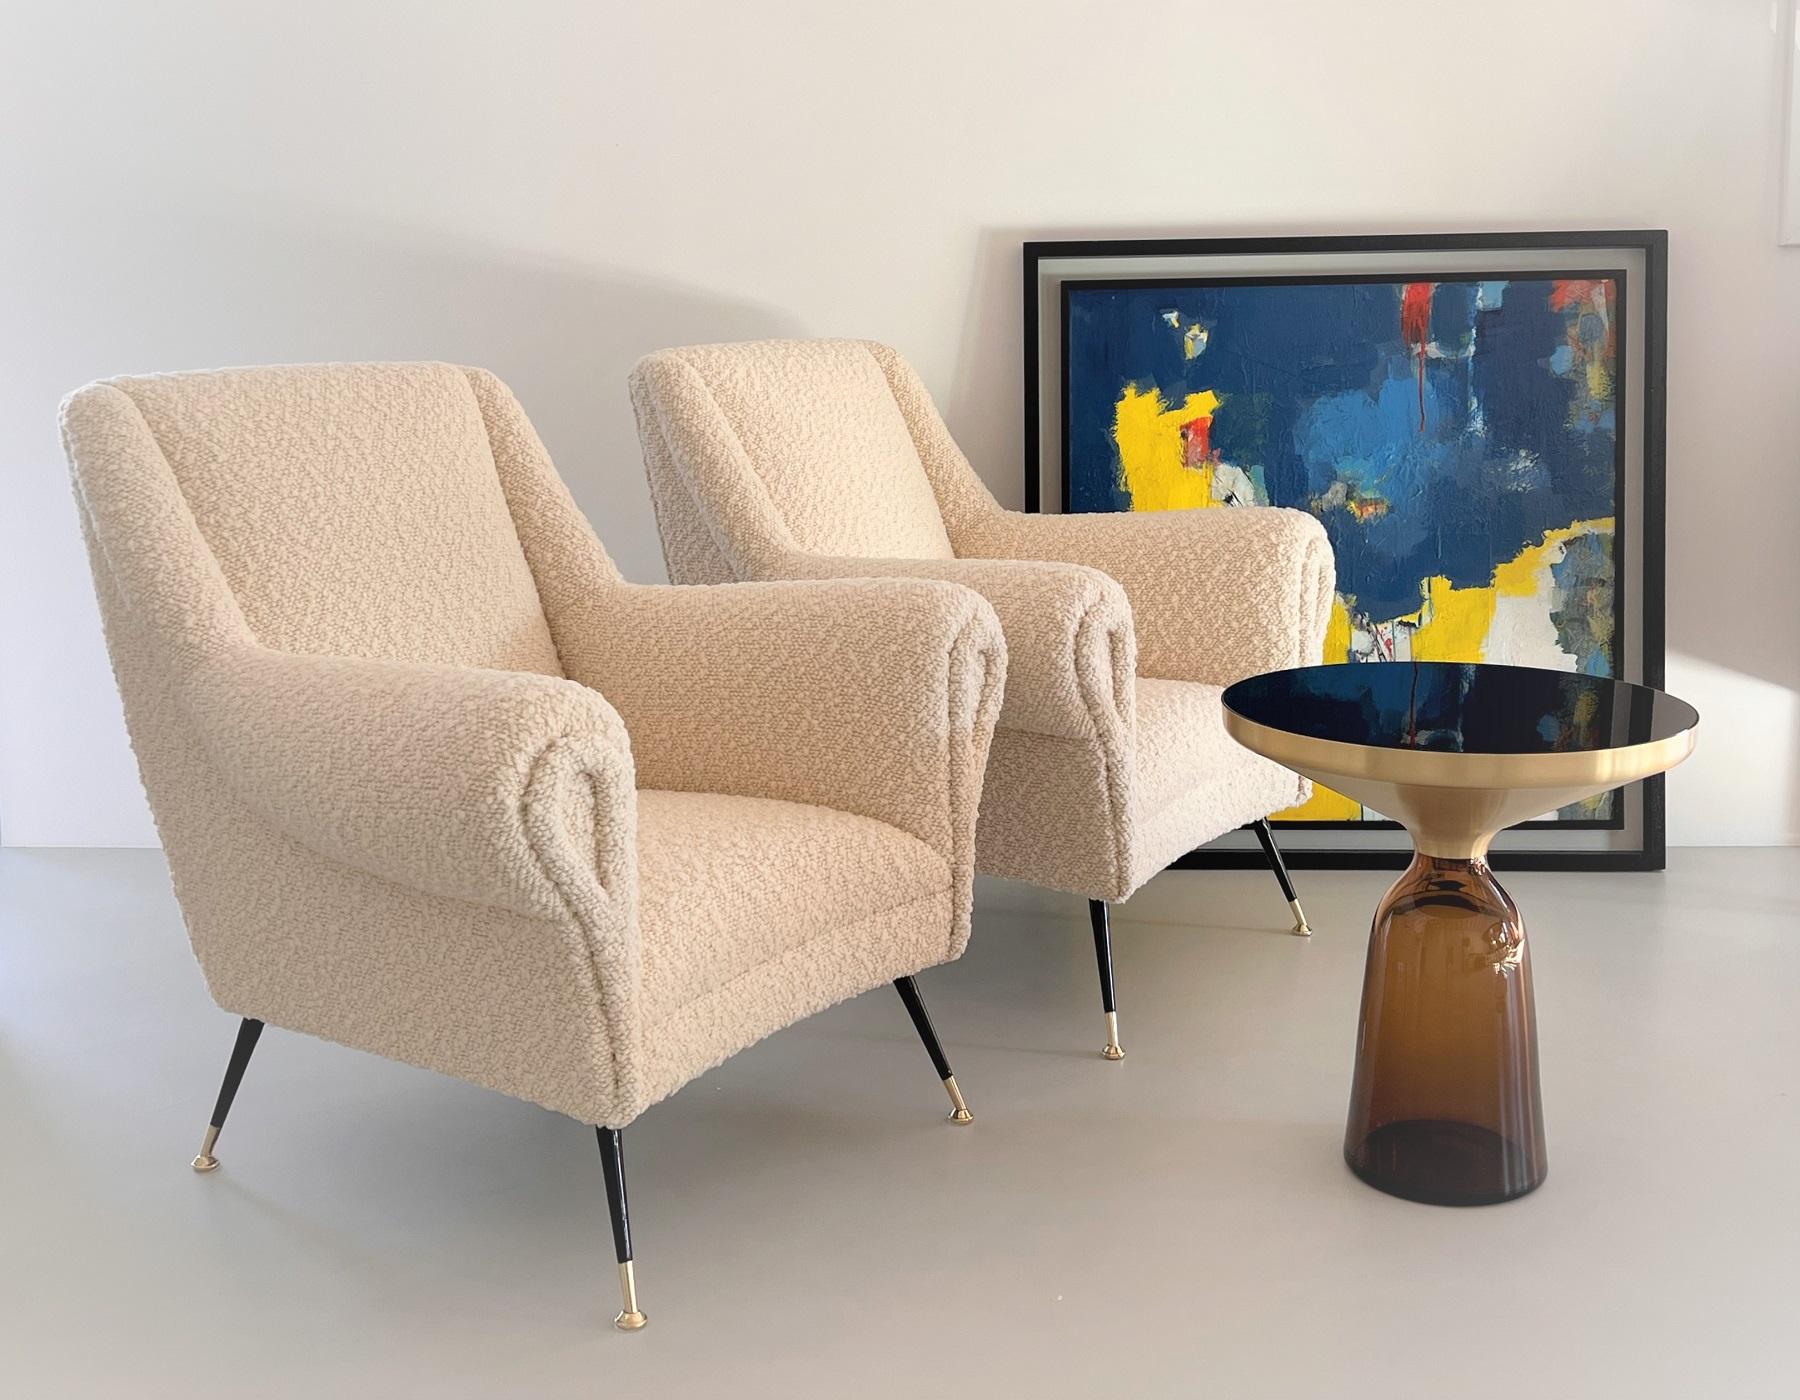 Magnificent large pair of original Italian armchairs with brass tips from the mid-century, late 1960s beginning of the 1970s.
Completely restored with new materials inside and re-upholstered with quality fabric in off-white color of mixed cotton -